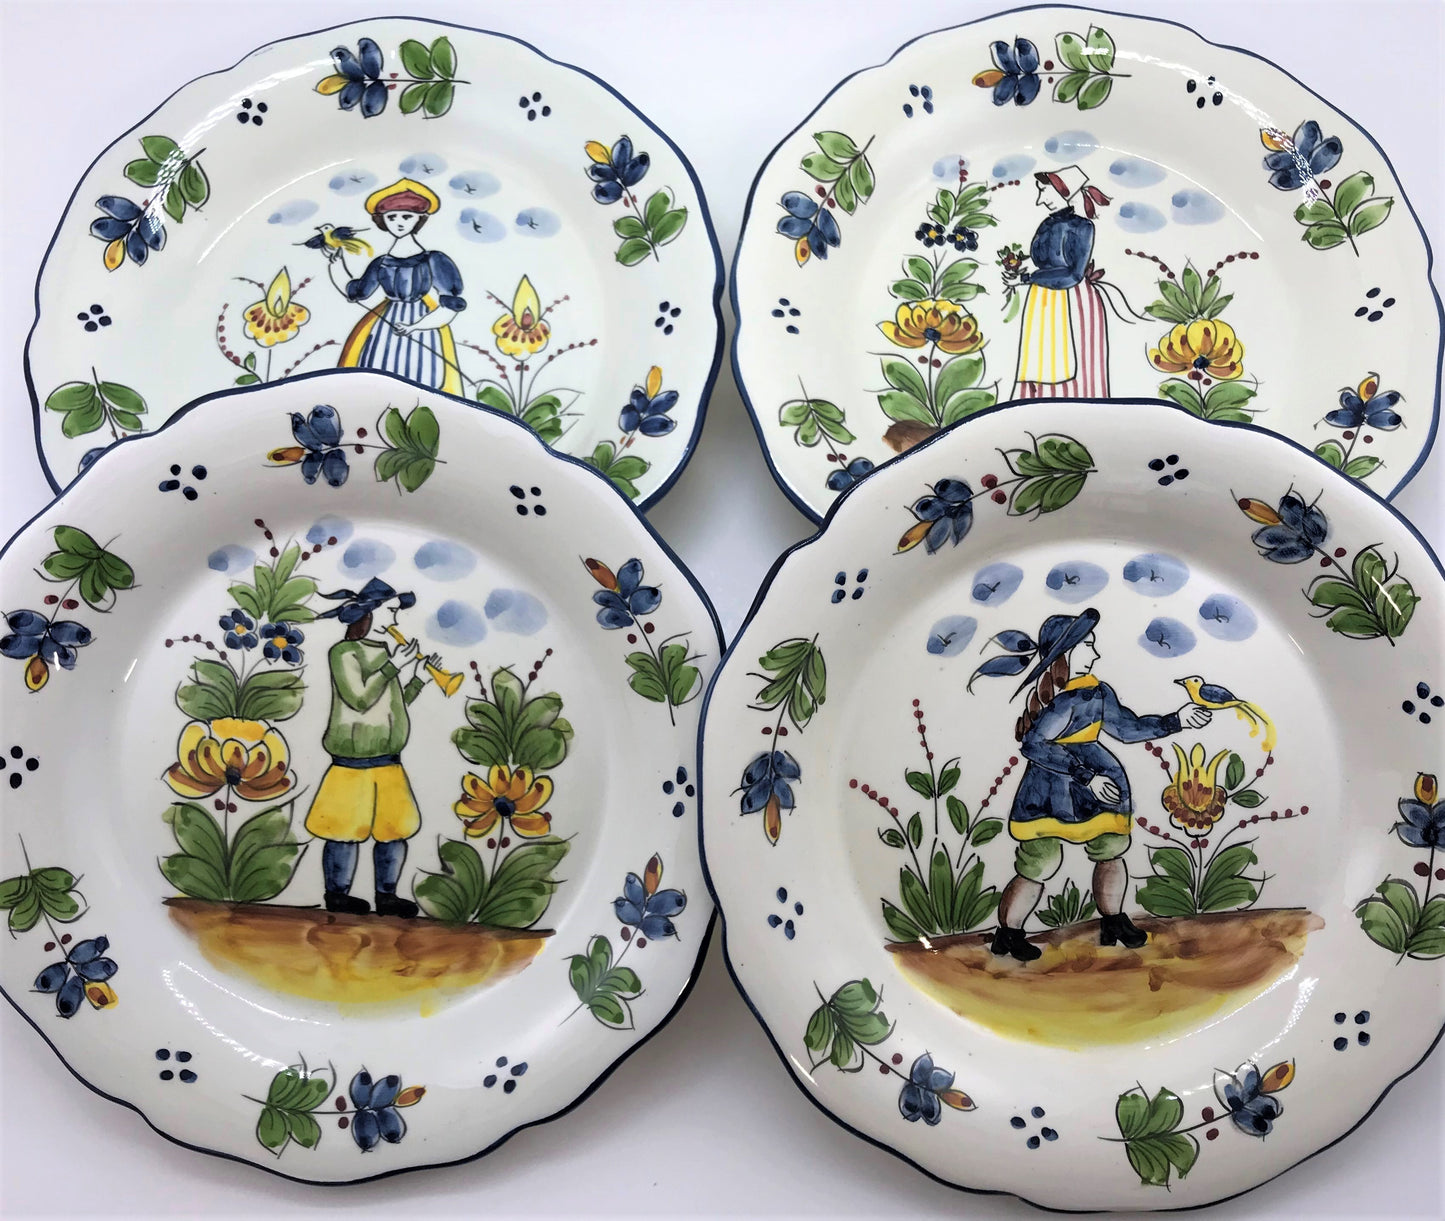 Portuguese Peasant Art Plates with Floral Detailing - Set of Four